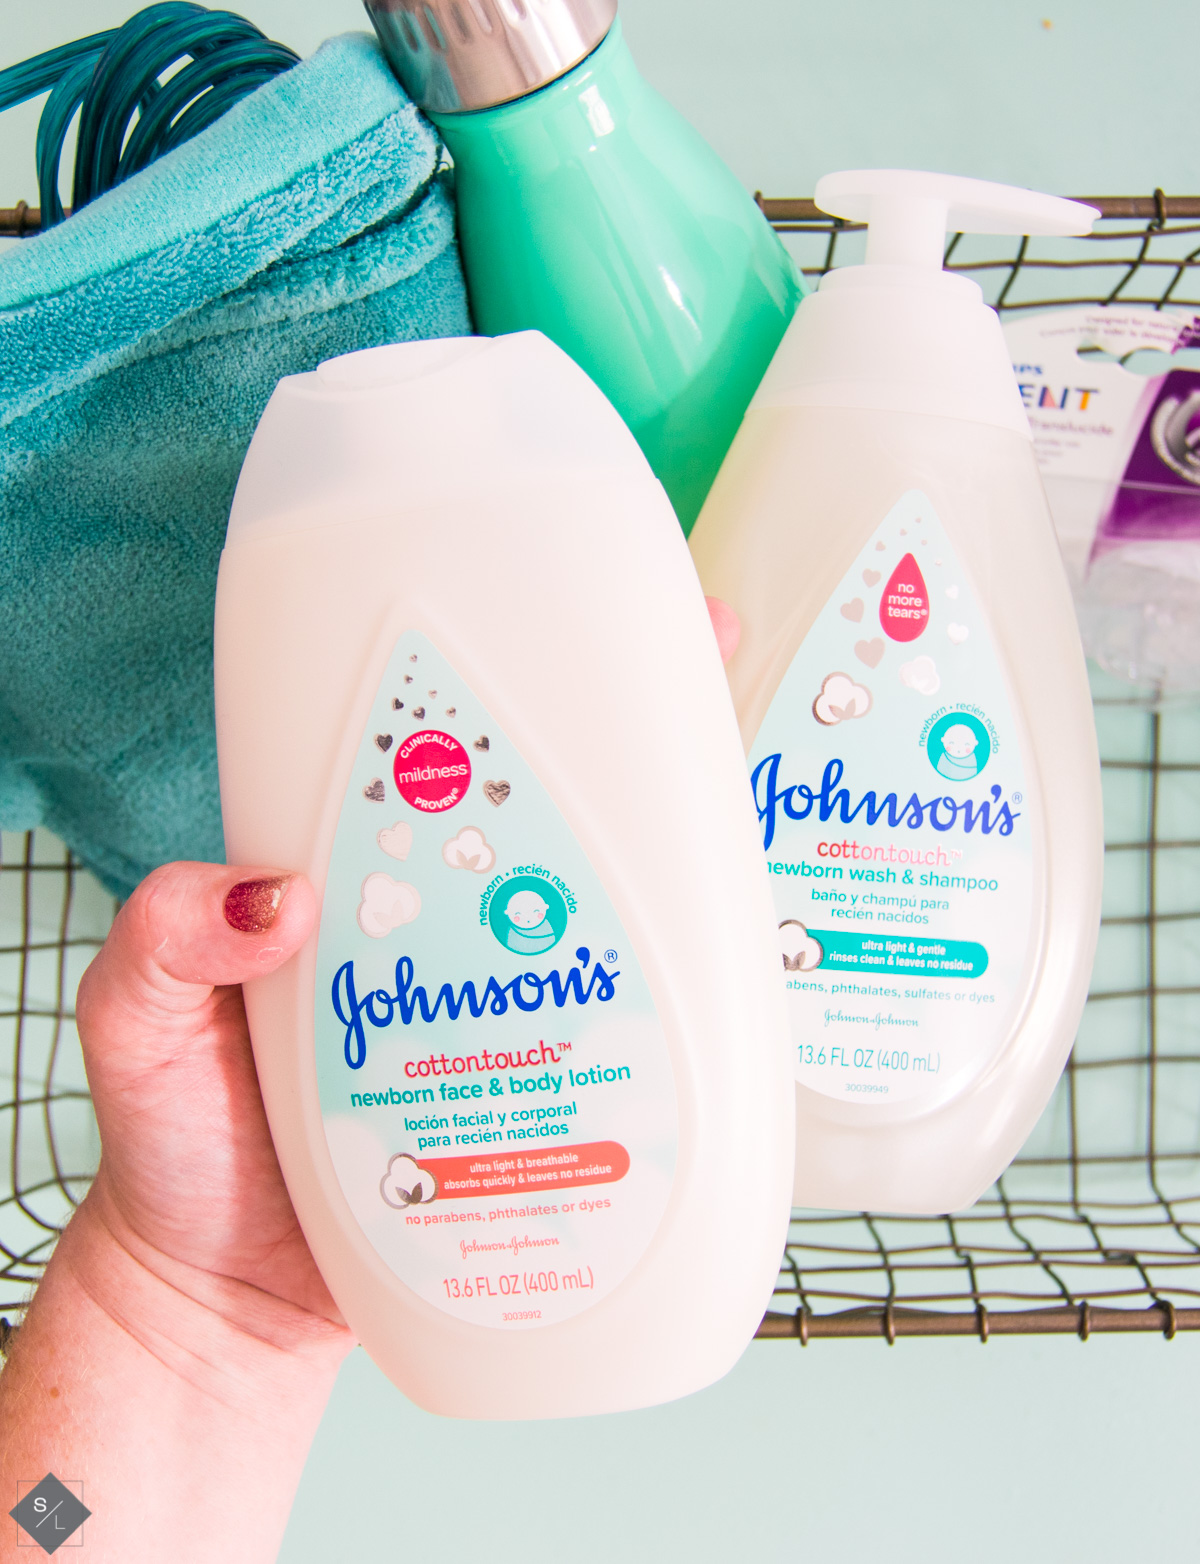 [ad] What is the best skincare for preemies? I'm showing you all what to look for and how Johnson & Johnson has been a clear winner. #TrustinGentle #ChooseGentle